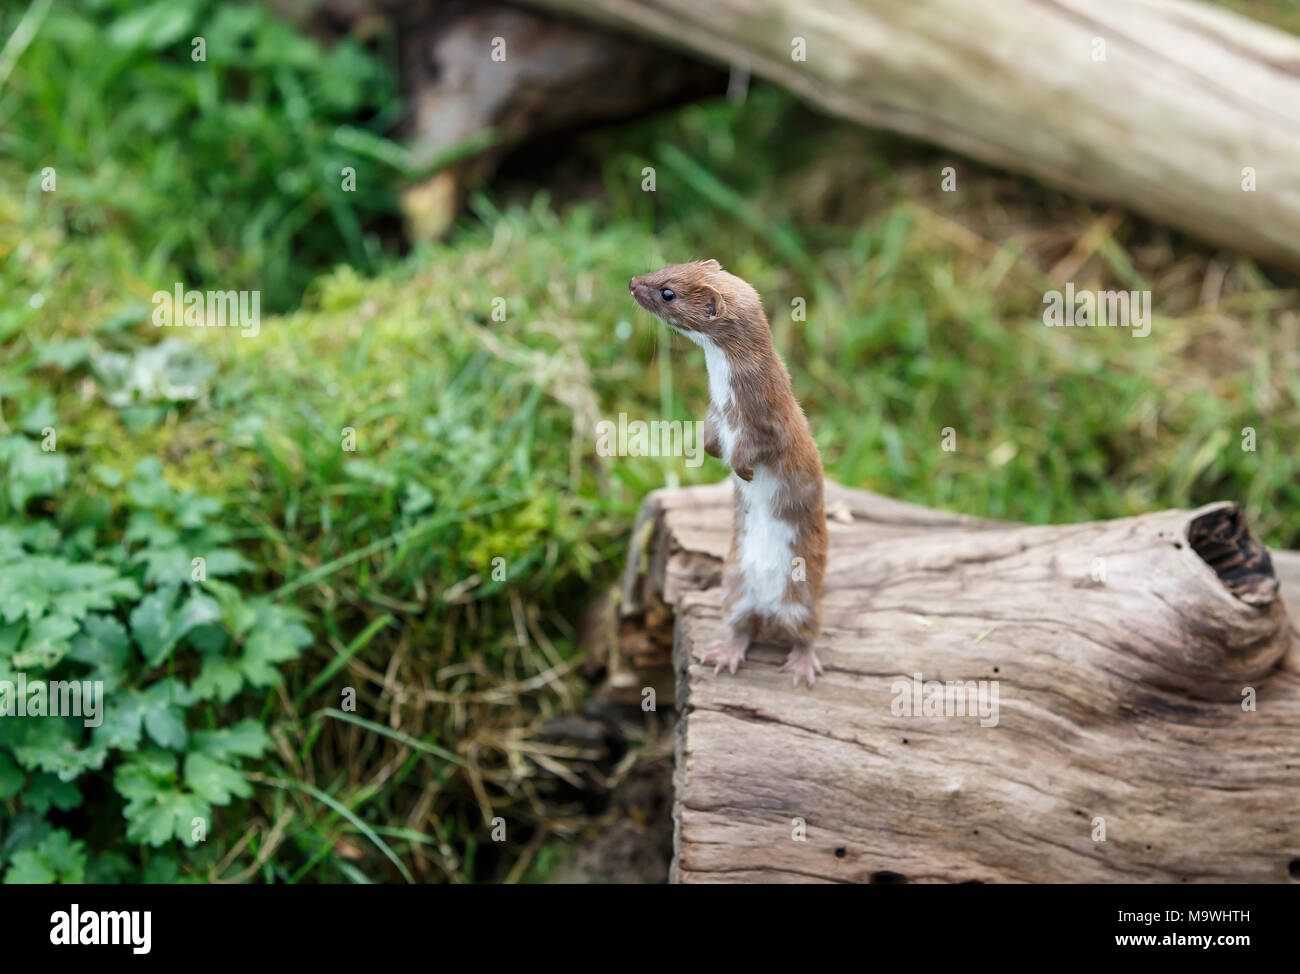 The least weasel, or simply weasel in the UK and much of the world, is the smallest member of the genus Mustela, family Mustelidae and order Carnivora. Stock Photo